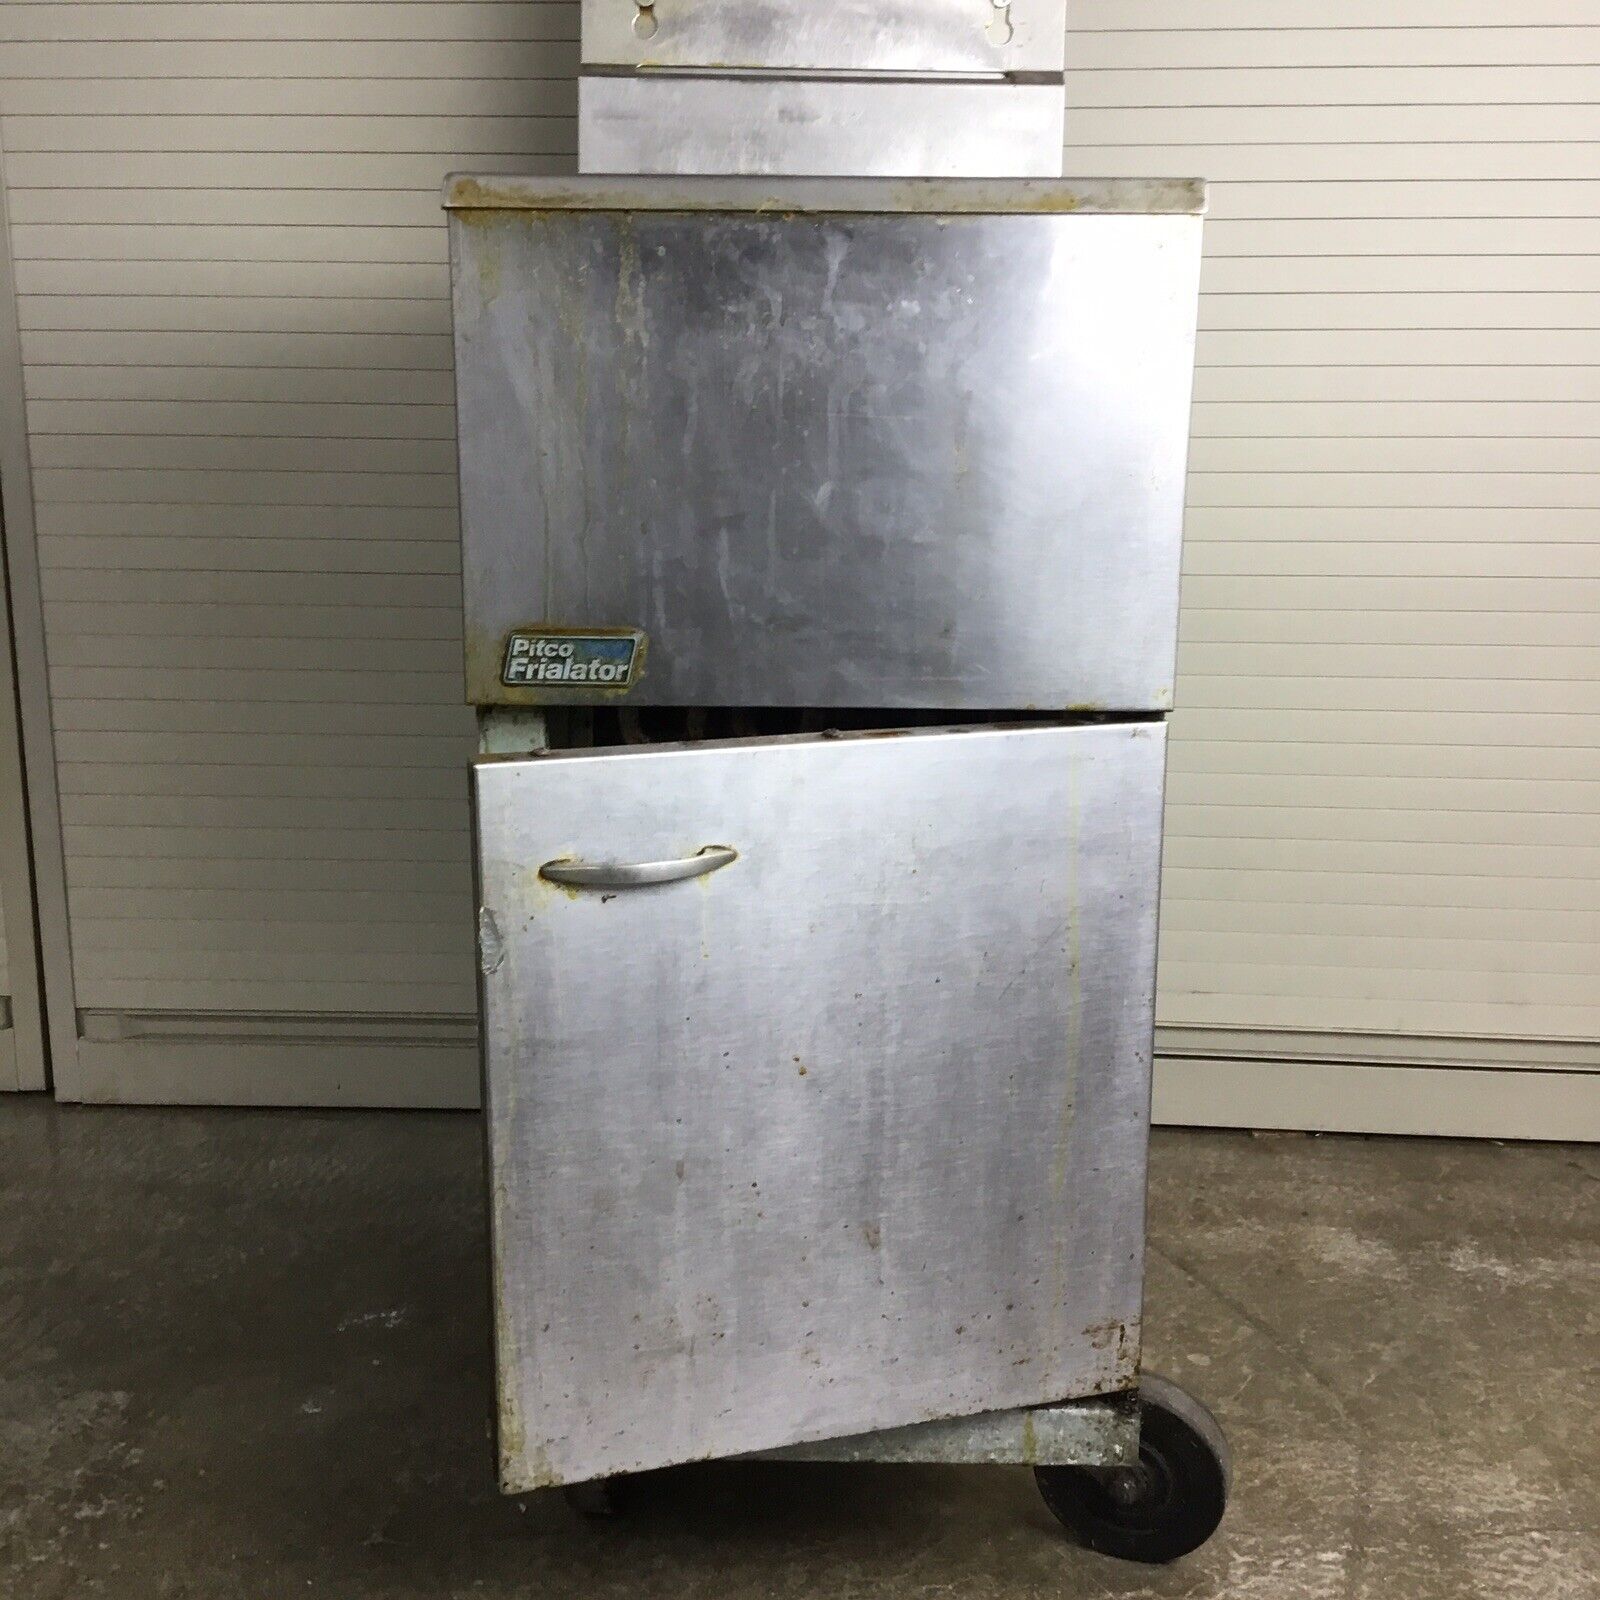 PITCO FRIALATOR 35C+S 35-lb to 40-lb Commercial Natural Gas Restaurant Fryer